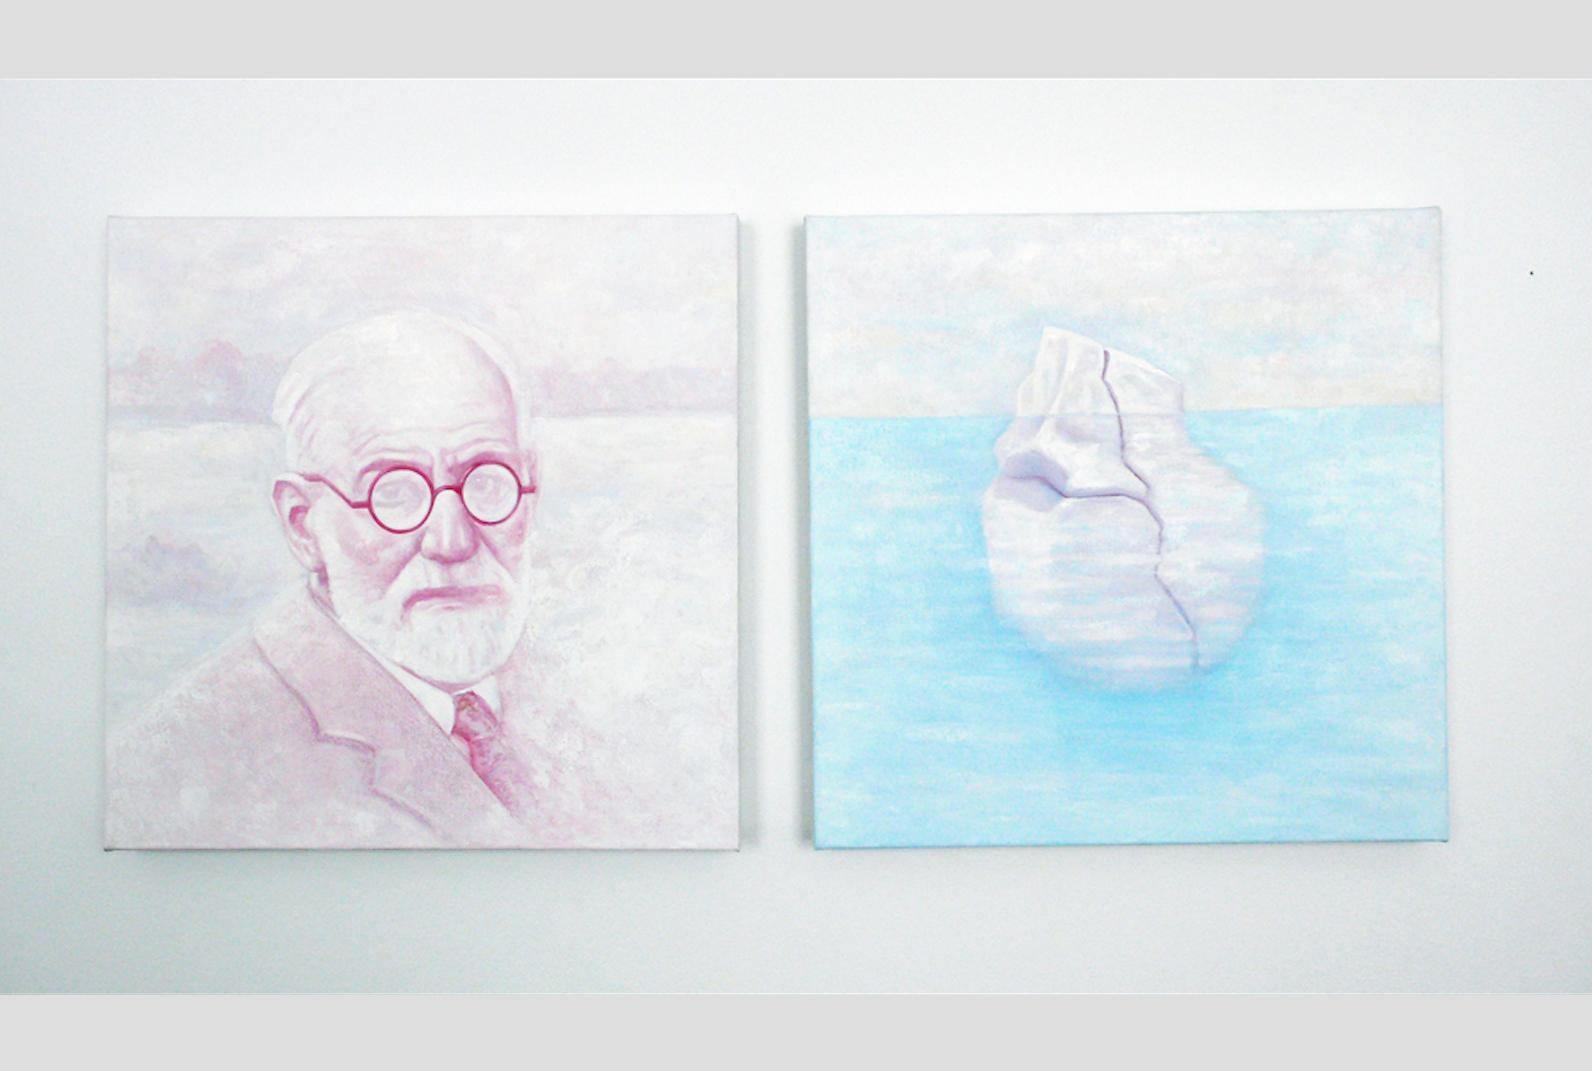 This diptych is comprised of  TWO paintings.  The artist created a series of works based on Sigmund Freud.  ANDRE VON MORISSE (Norwegian, b. 1966 in Oslo, Norway, lives and works in New York, NY). The project Pink Freud and the Pleasant Horizon